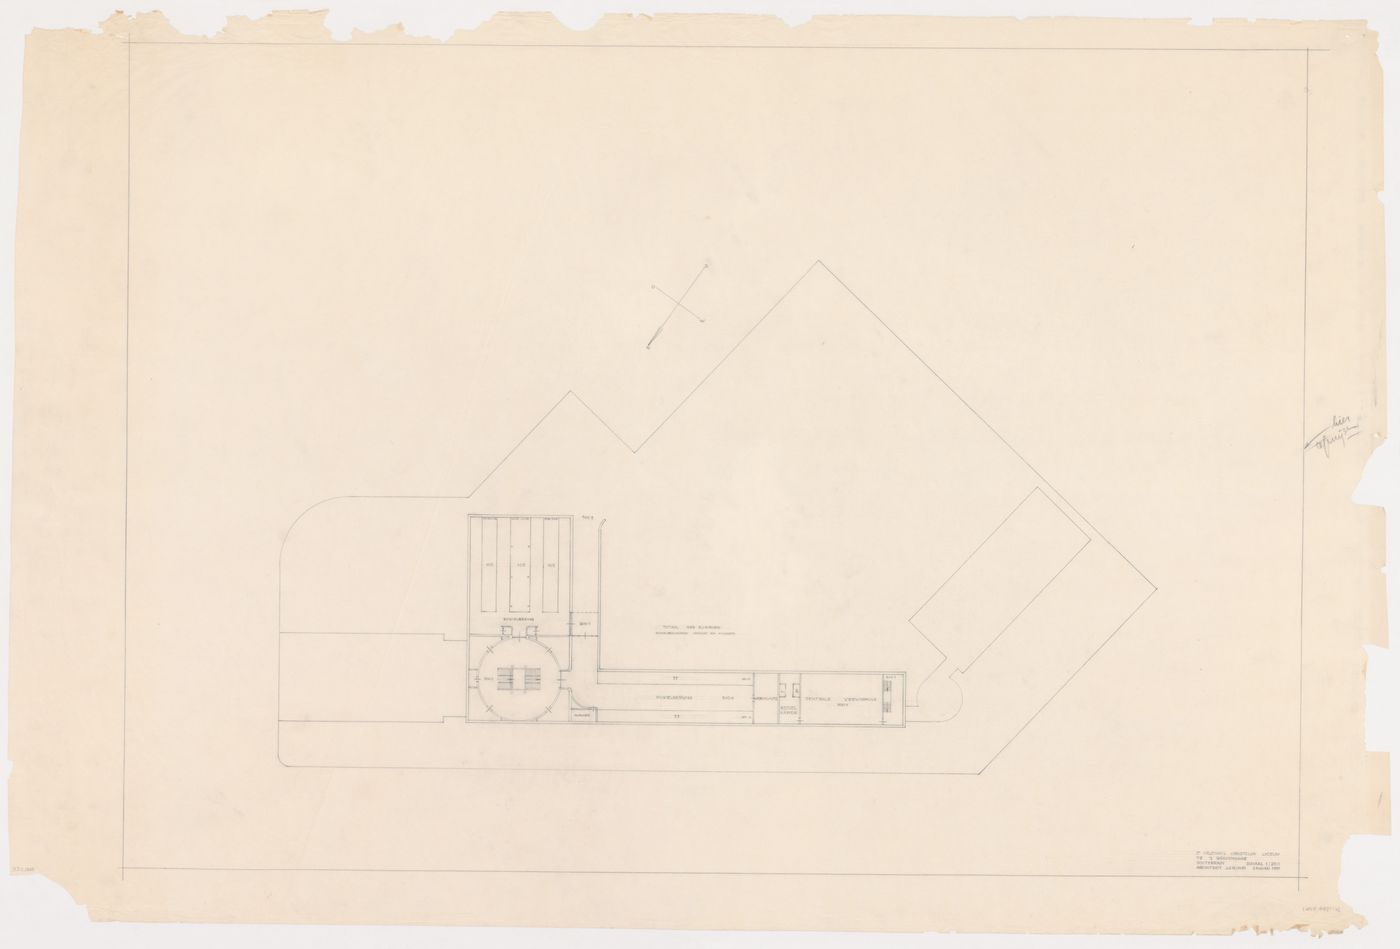 Basement plan for the Second Liberal Christian Lyceum, The Hague, Netherlands